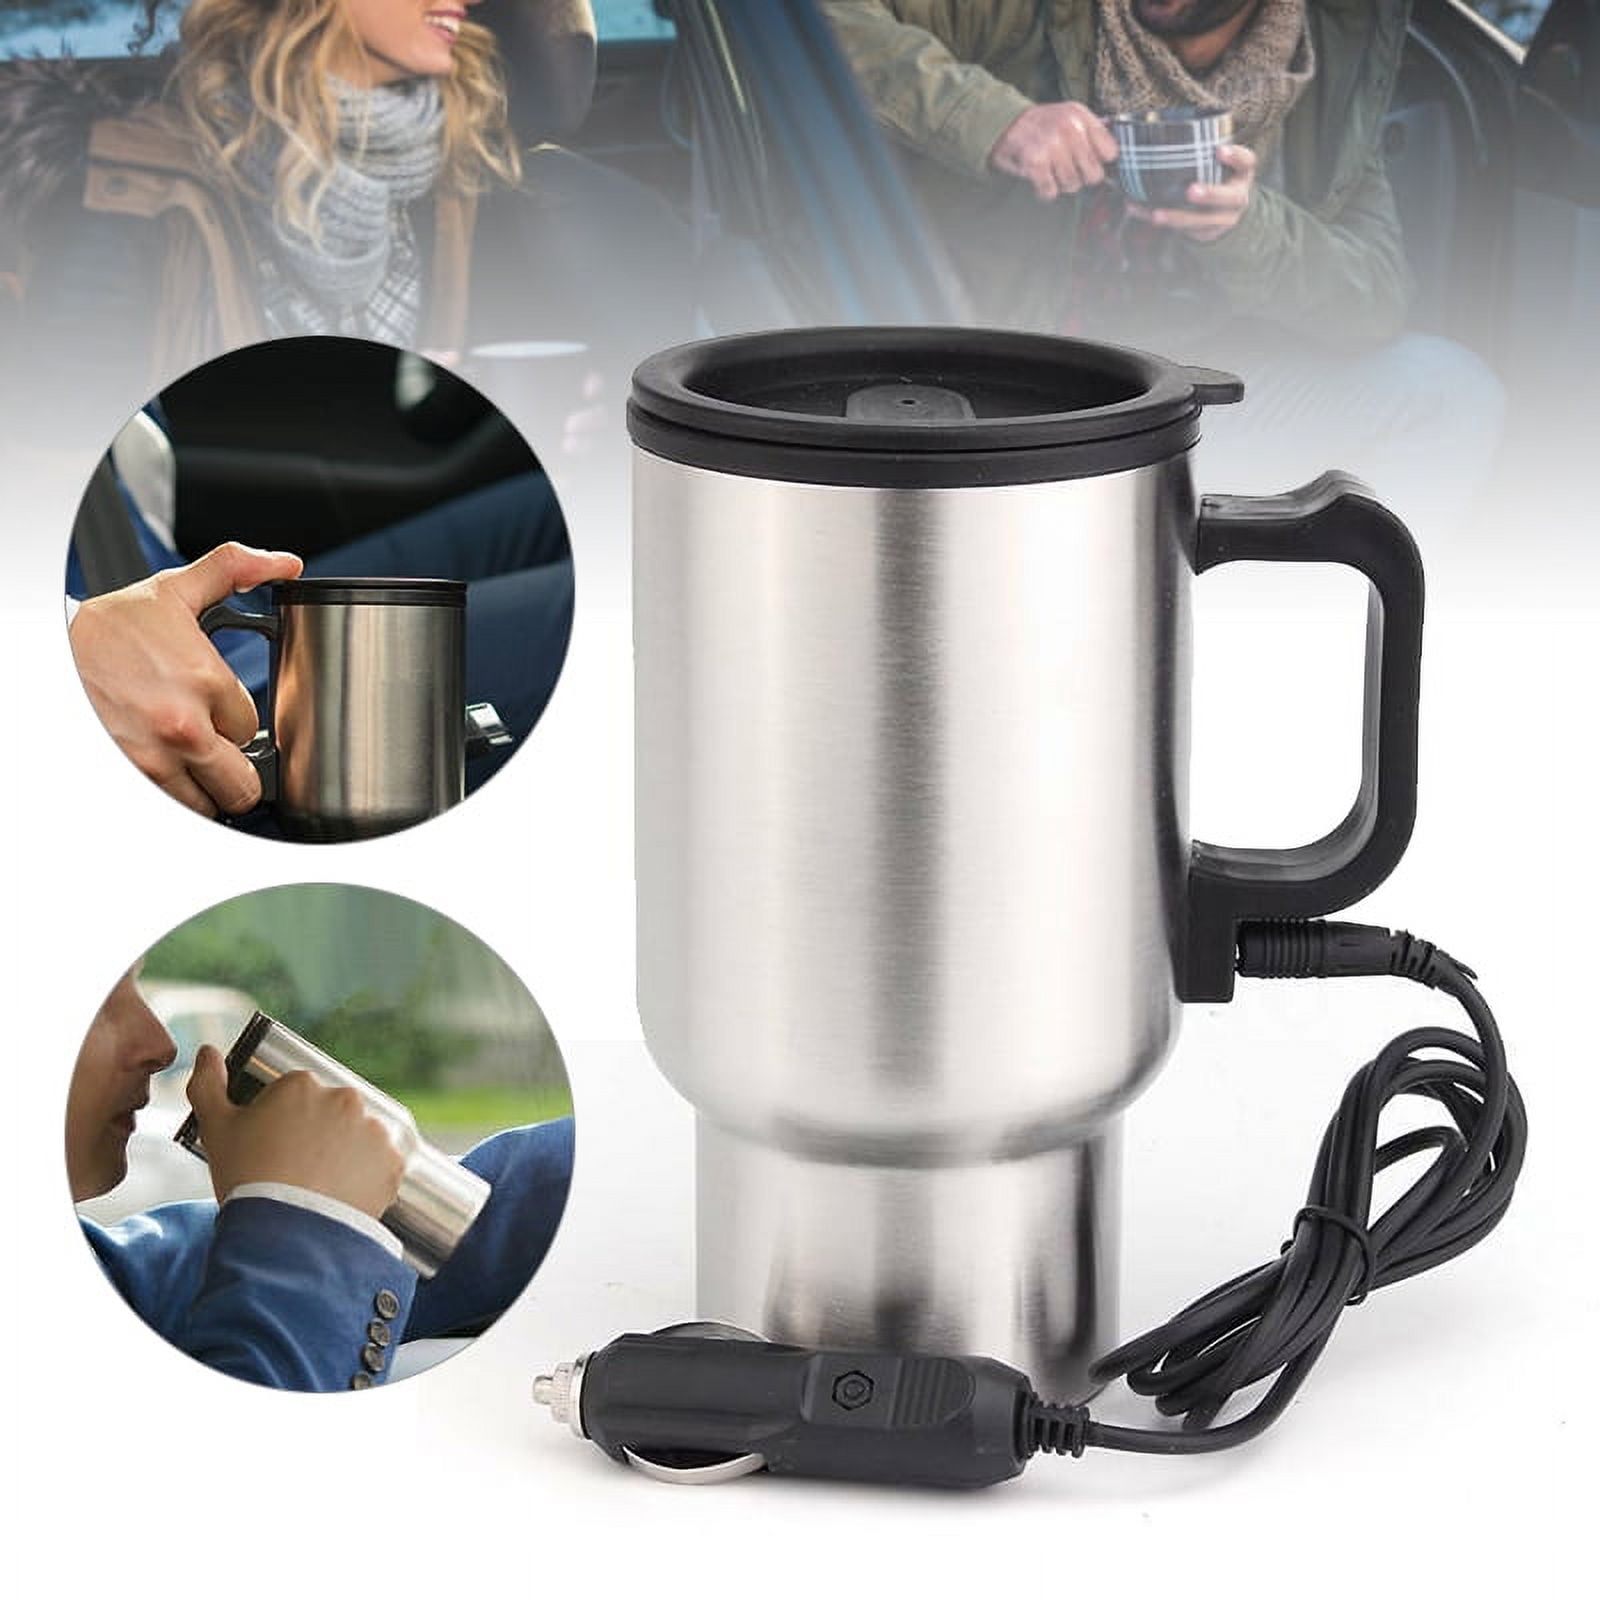 Rely2016 12V Car Heating Cup Stainless Steel Travel Coffee Cup Insulated  Heated Thermos Mug with Plastic Inside, 450ml Car Kettle for Heating Water